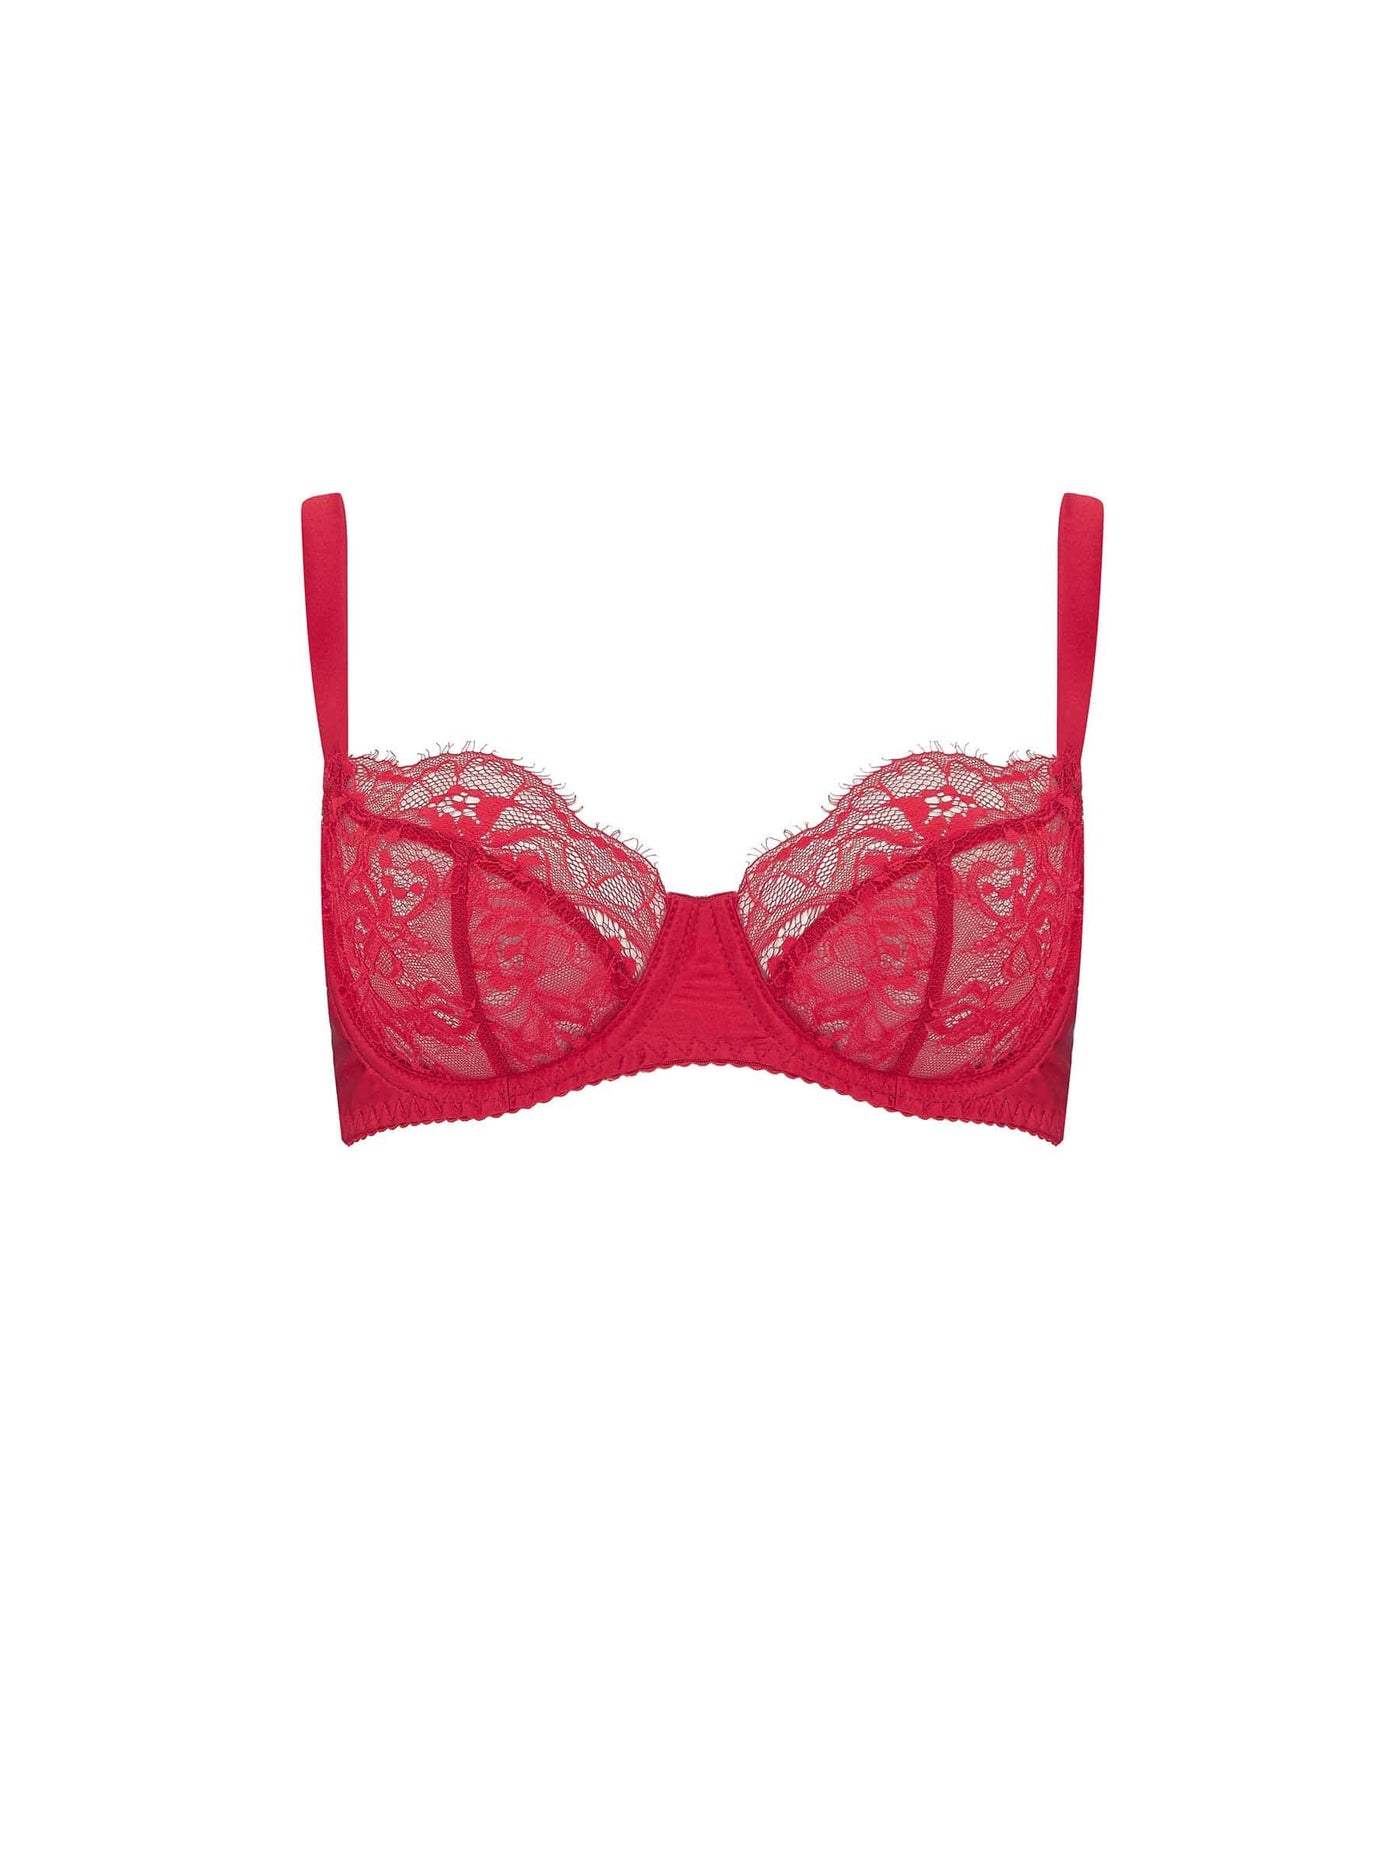 Front of Fleur of England red, lace balcony bra from the Adeline collection.